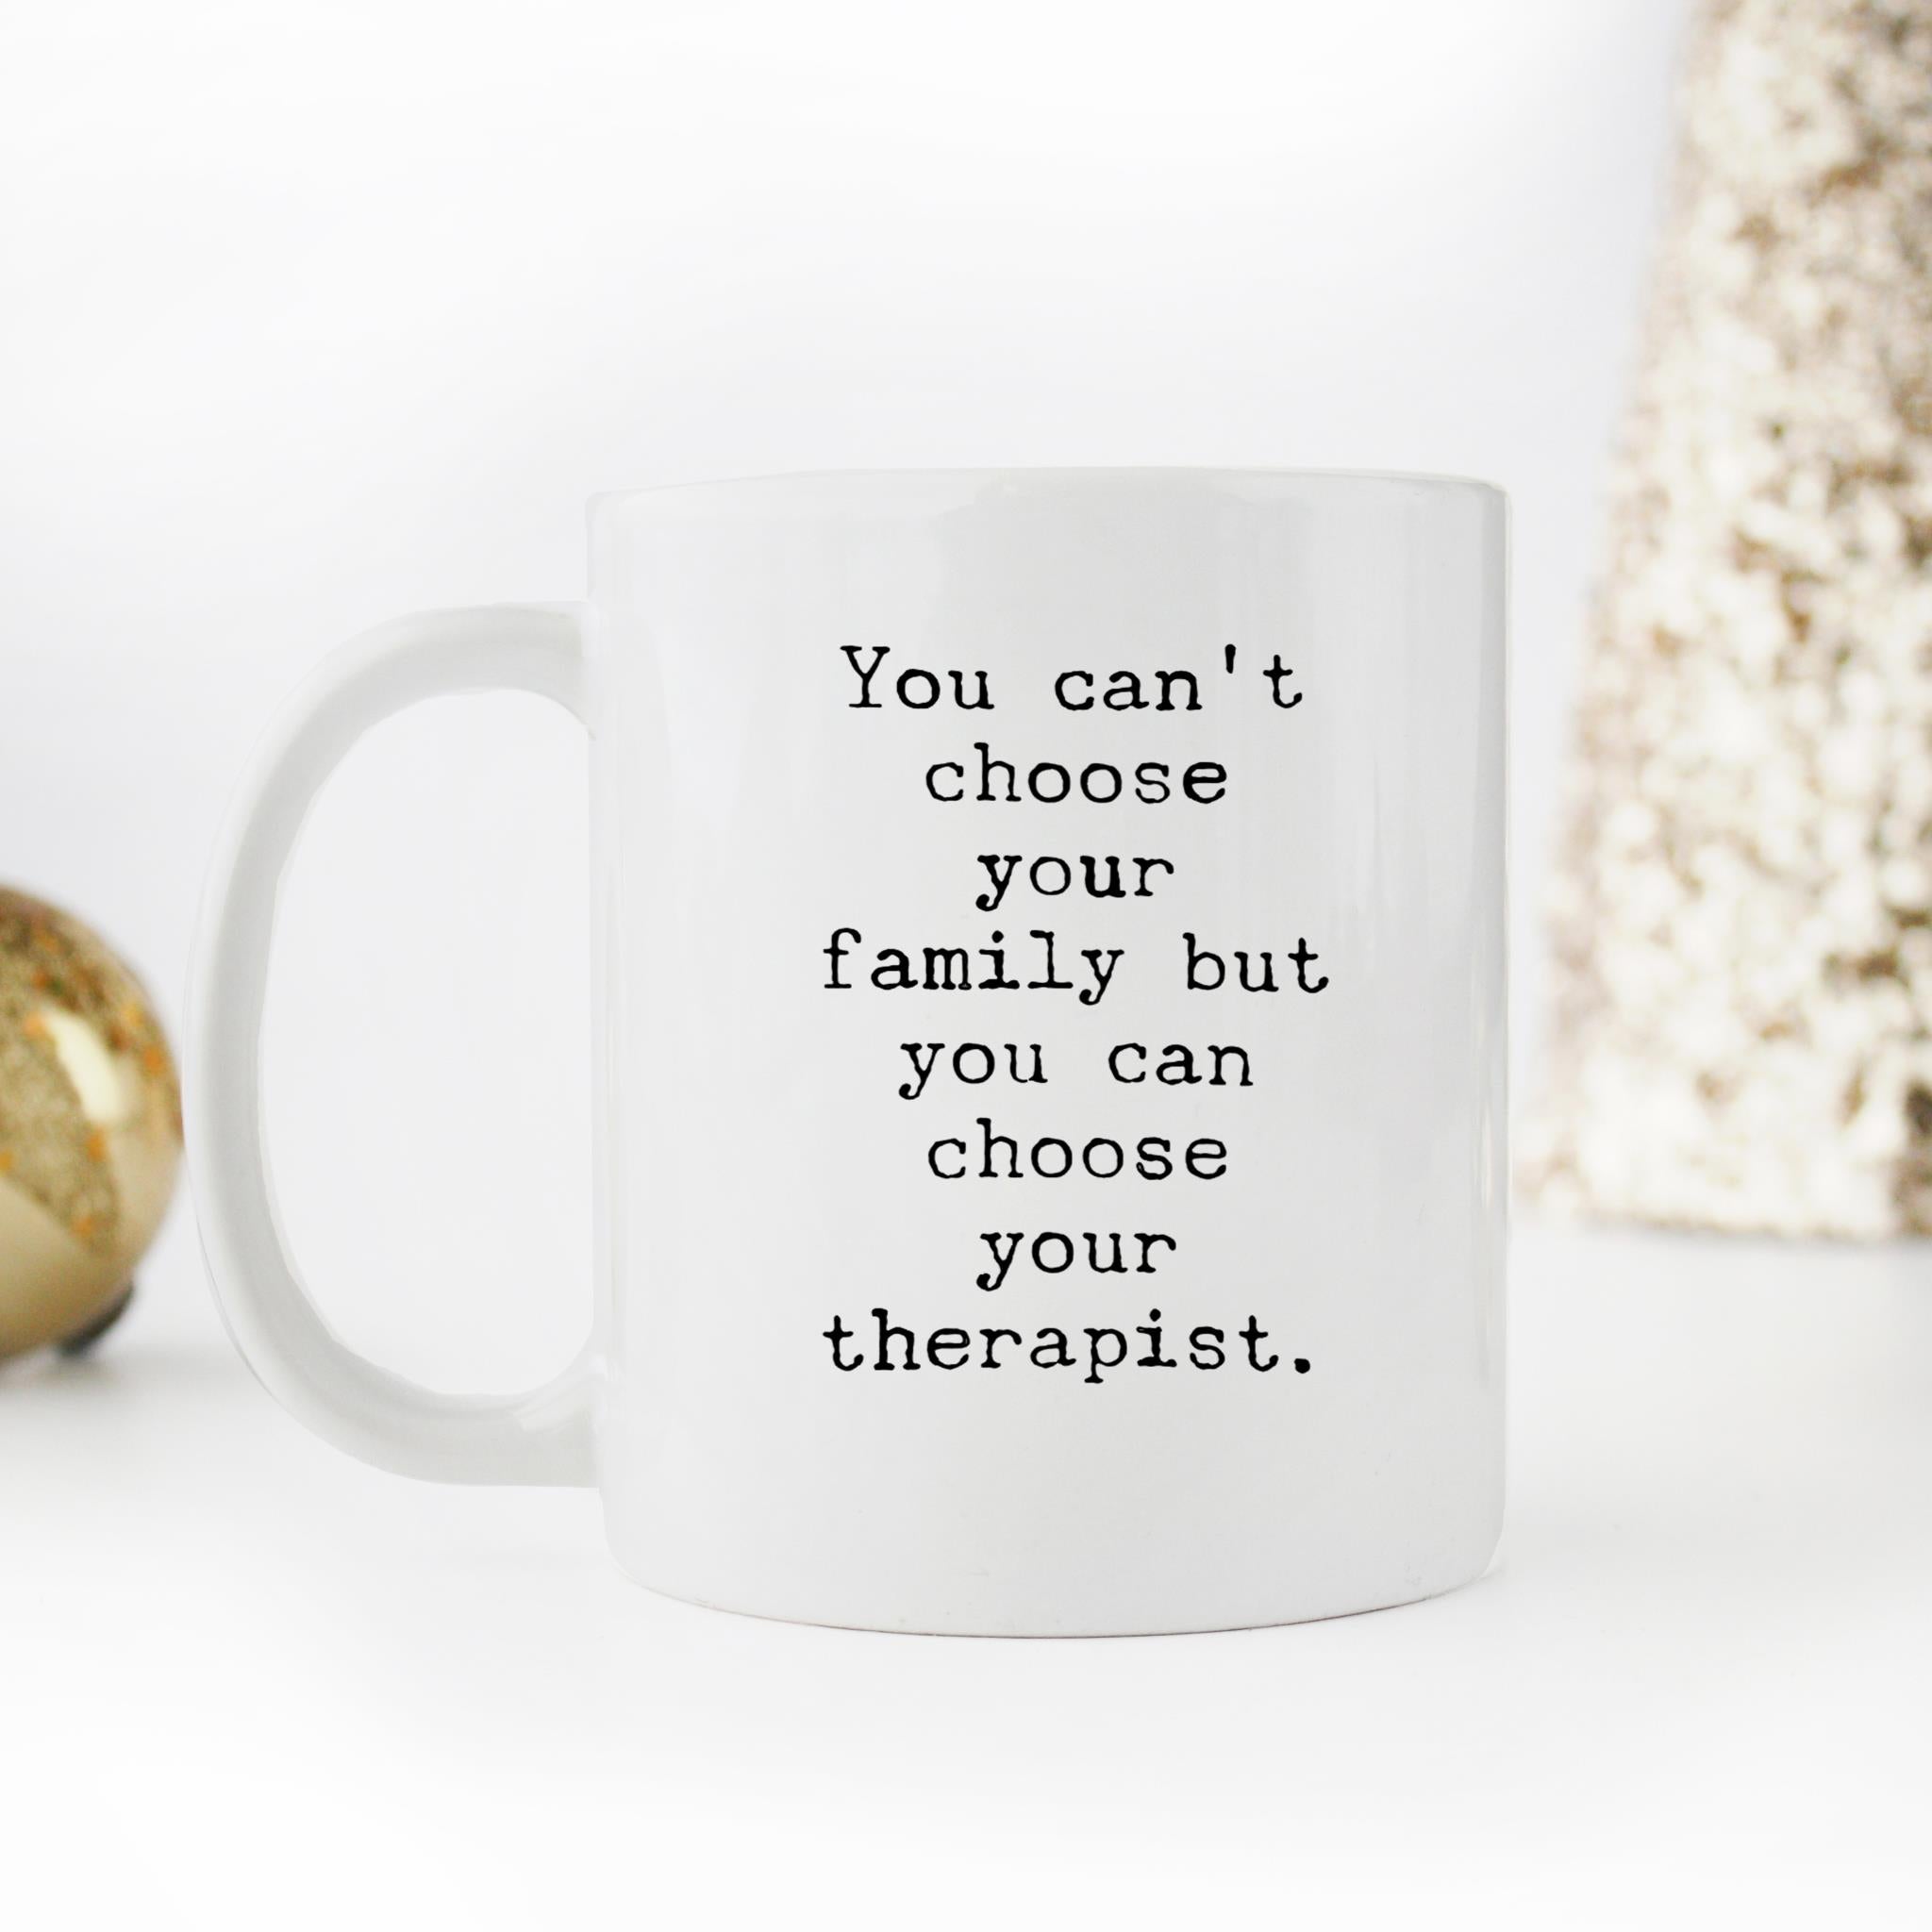 Skitongifts Funny Ceramic Novelty Coffee Mug You Can't Choose Family But Can Choose Therapist hOsyYk4